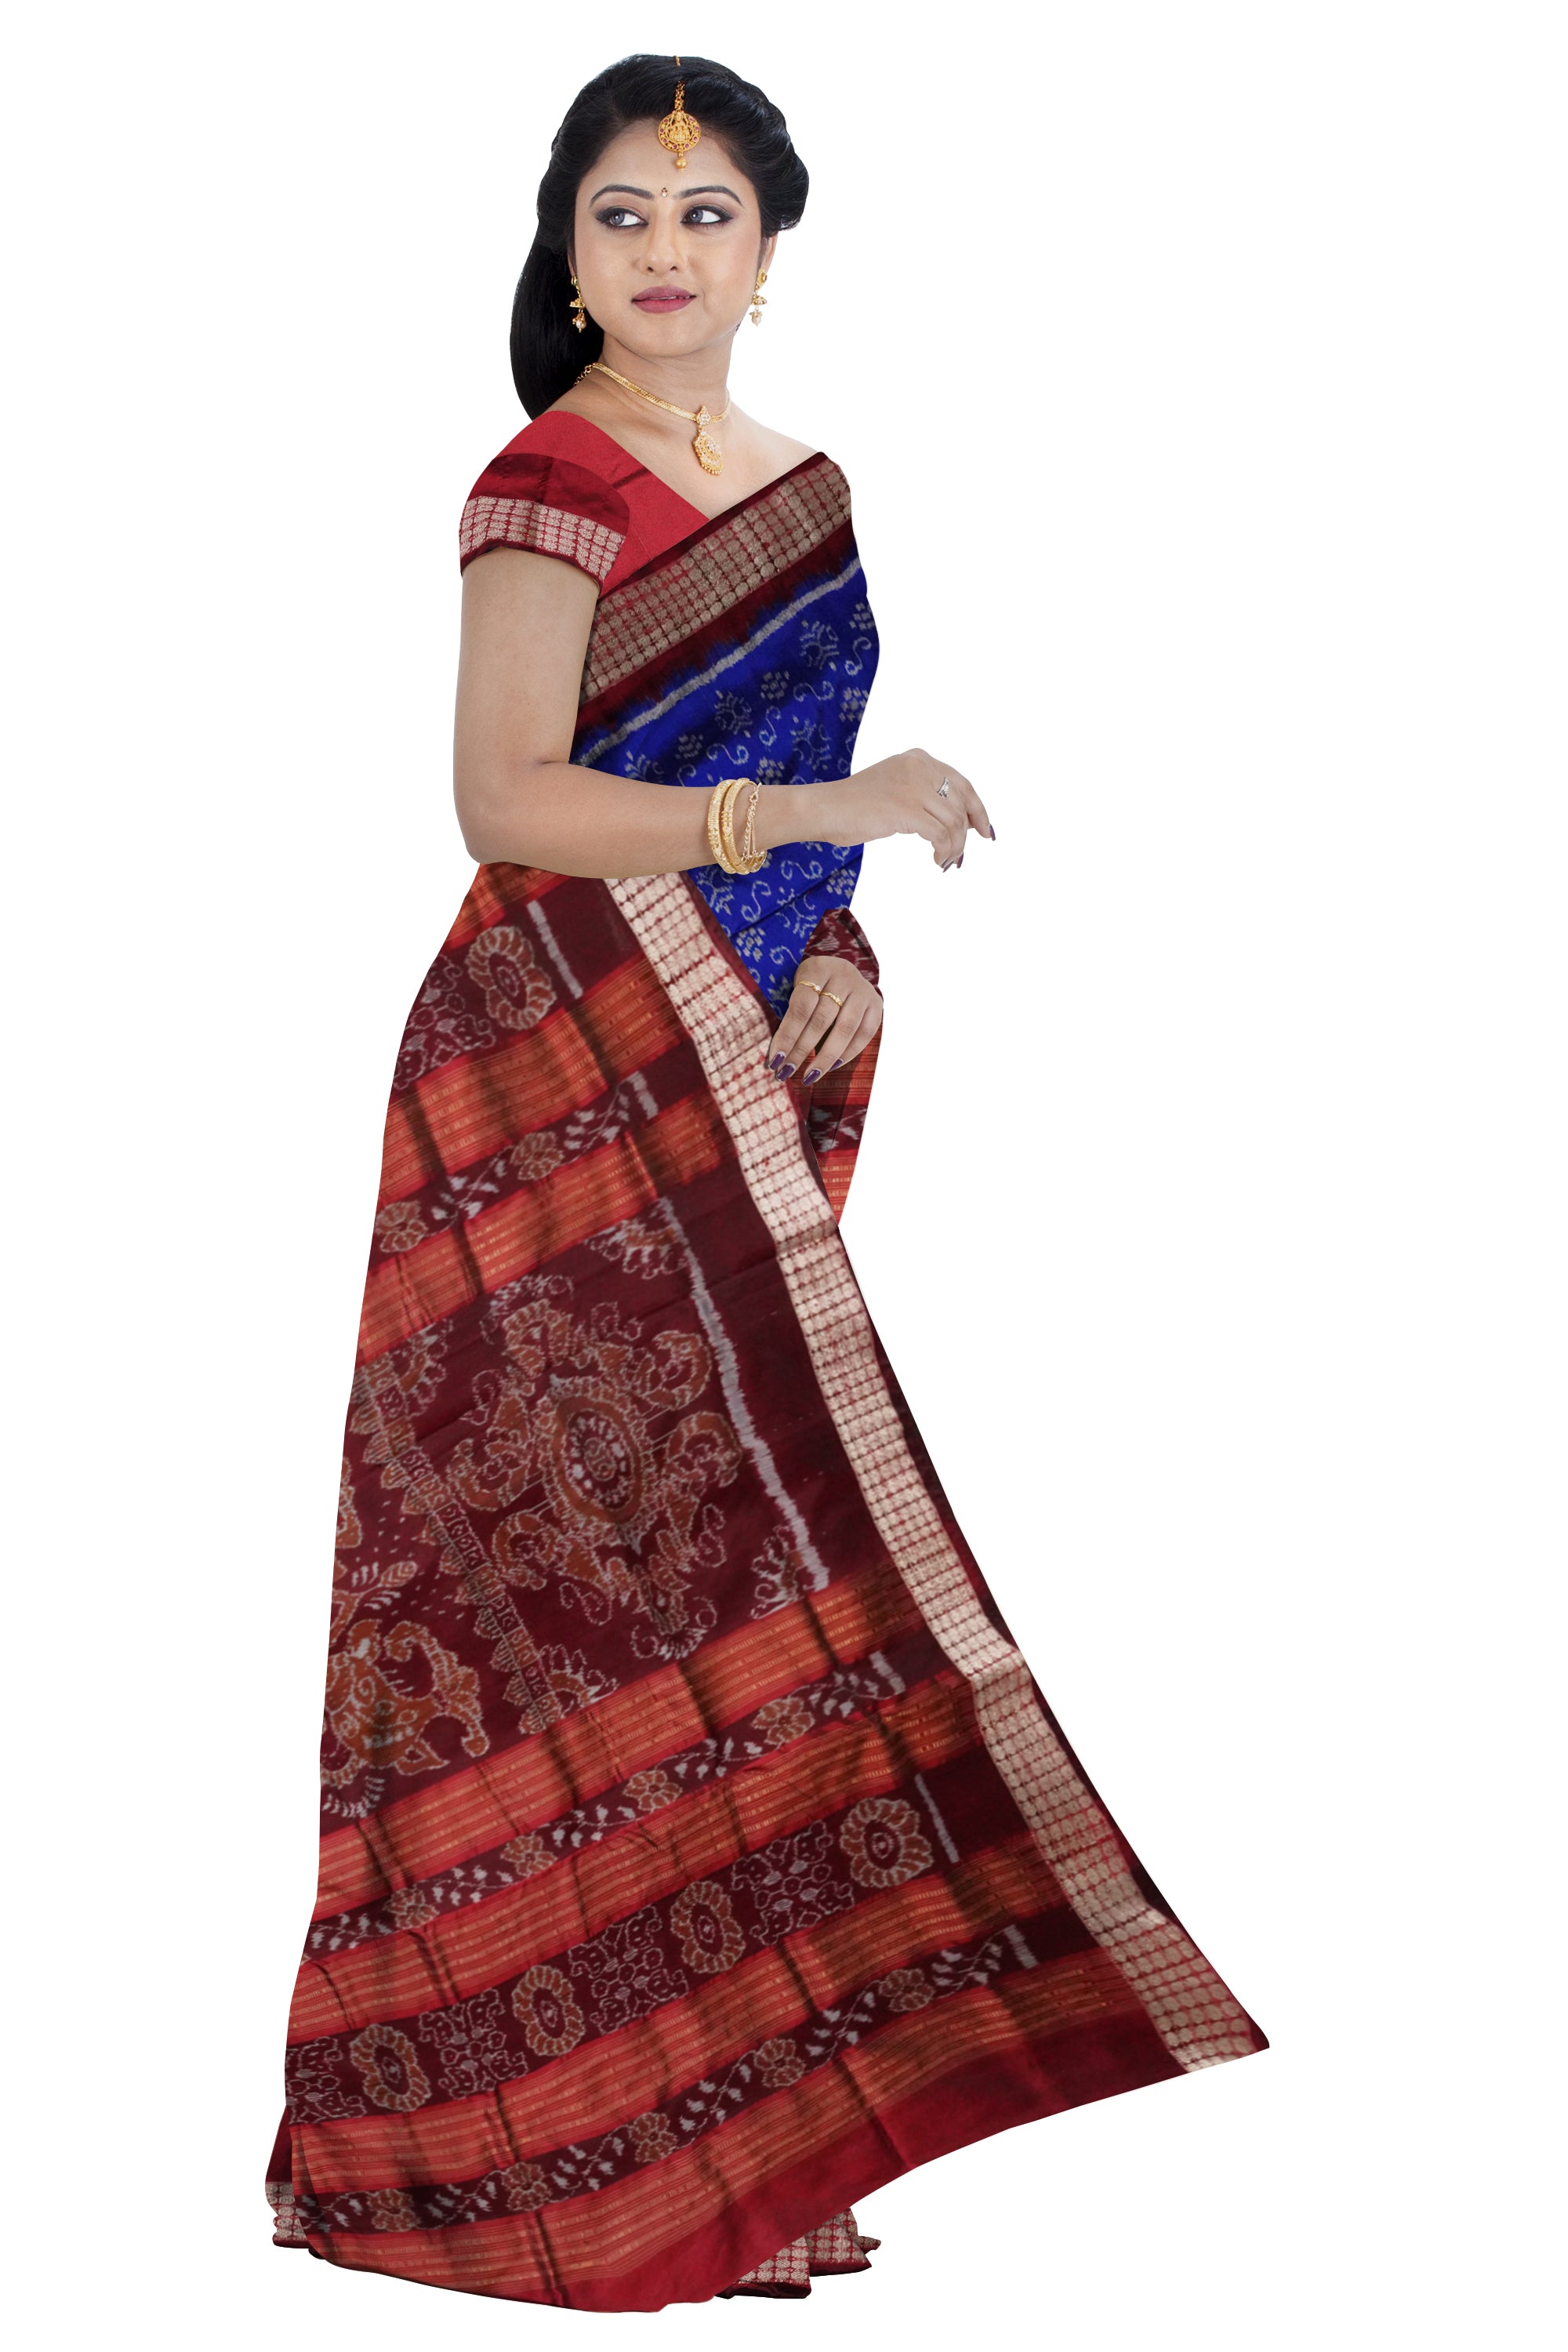 Small pasapali with terracotta pattern patli design pata saree in blue and maroon color. - Koshali Arts & Crafts Enterprise